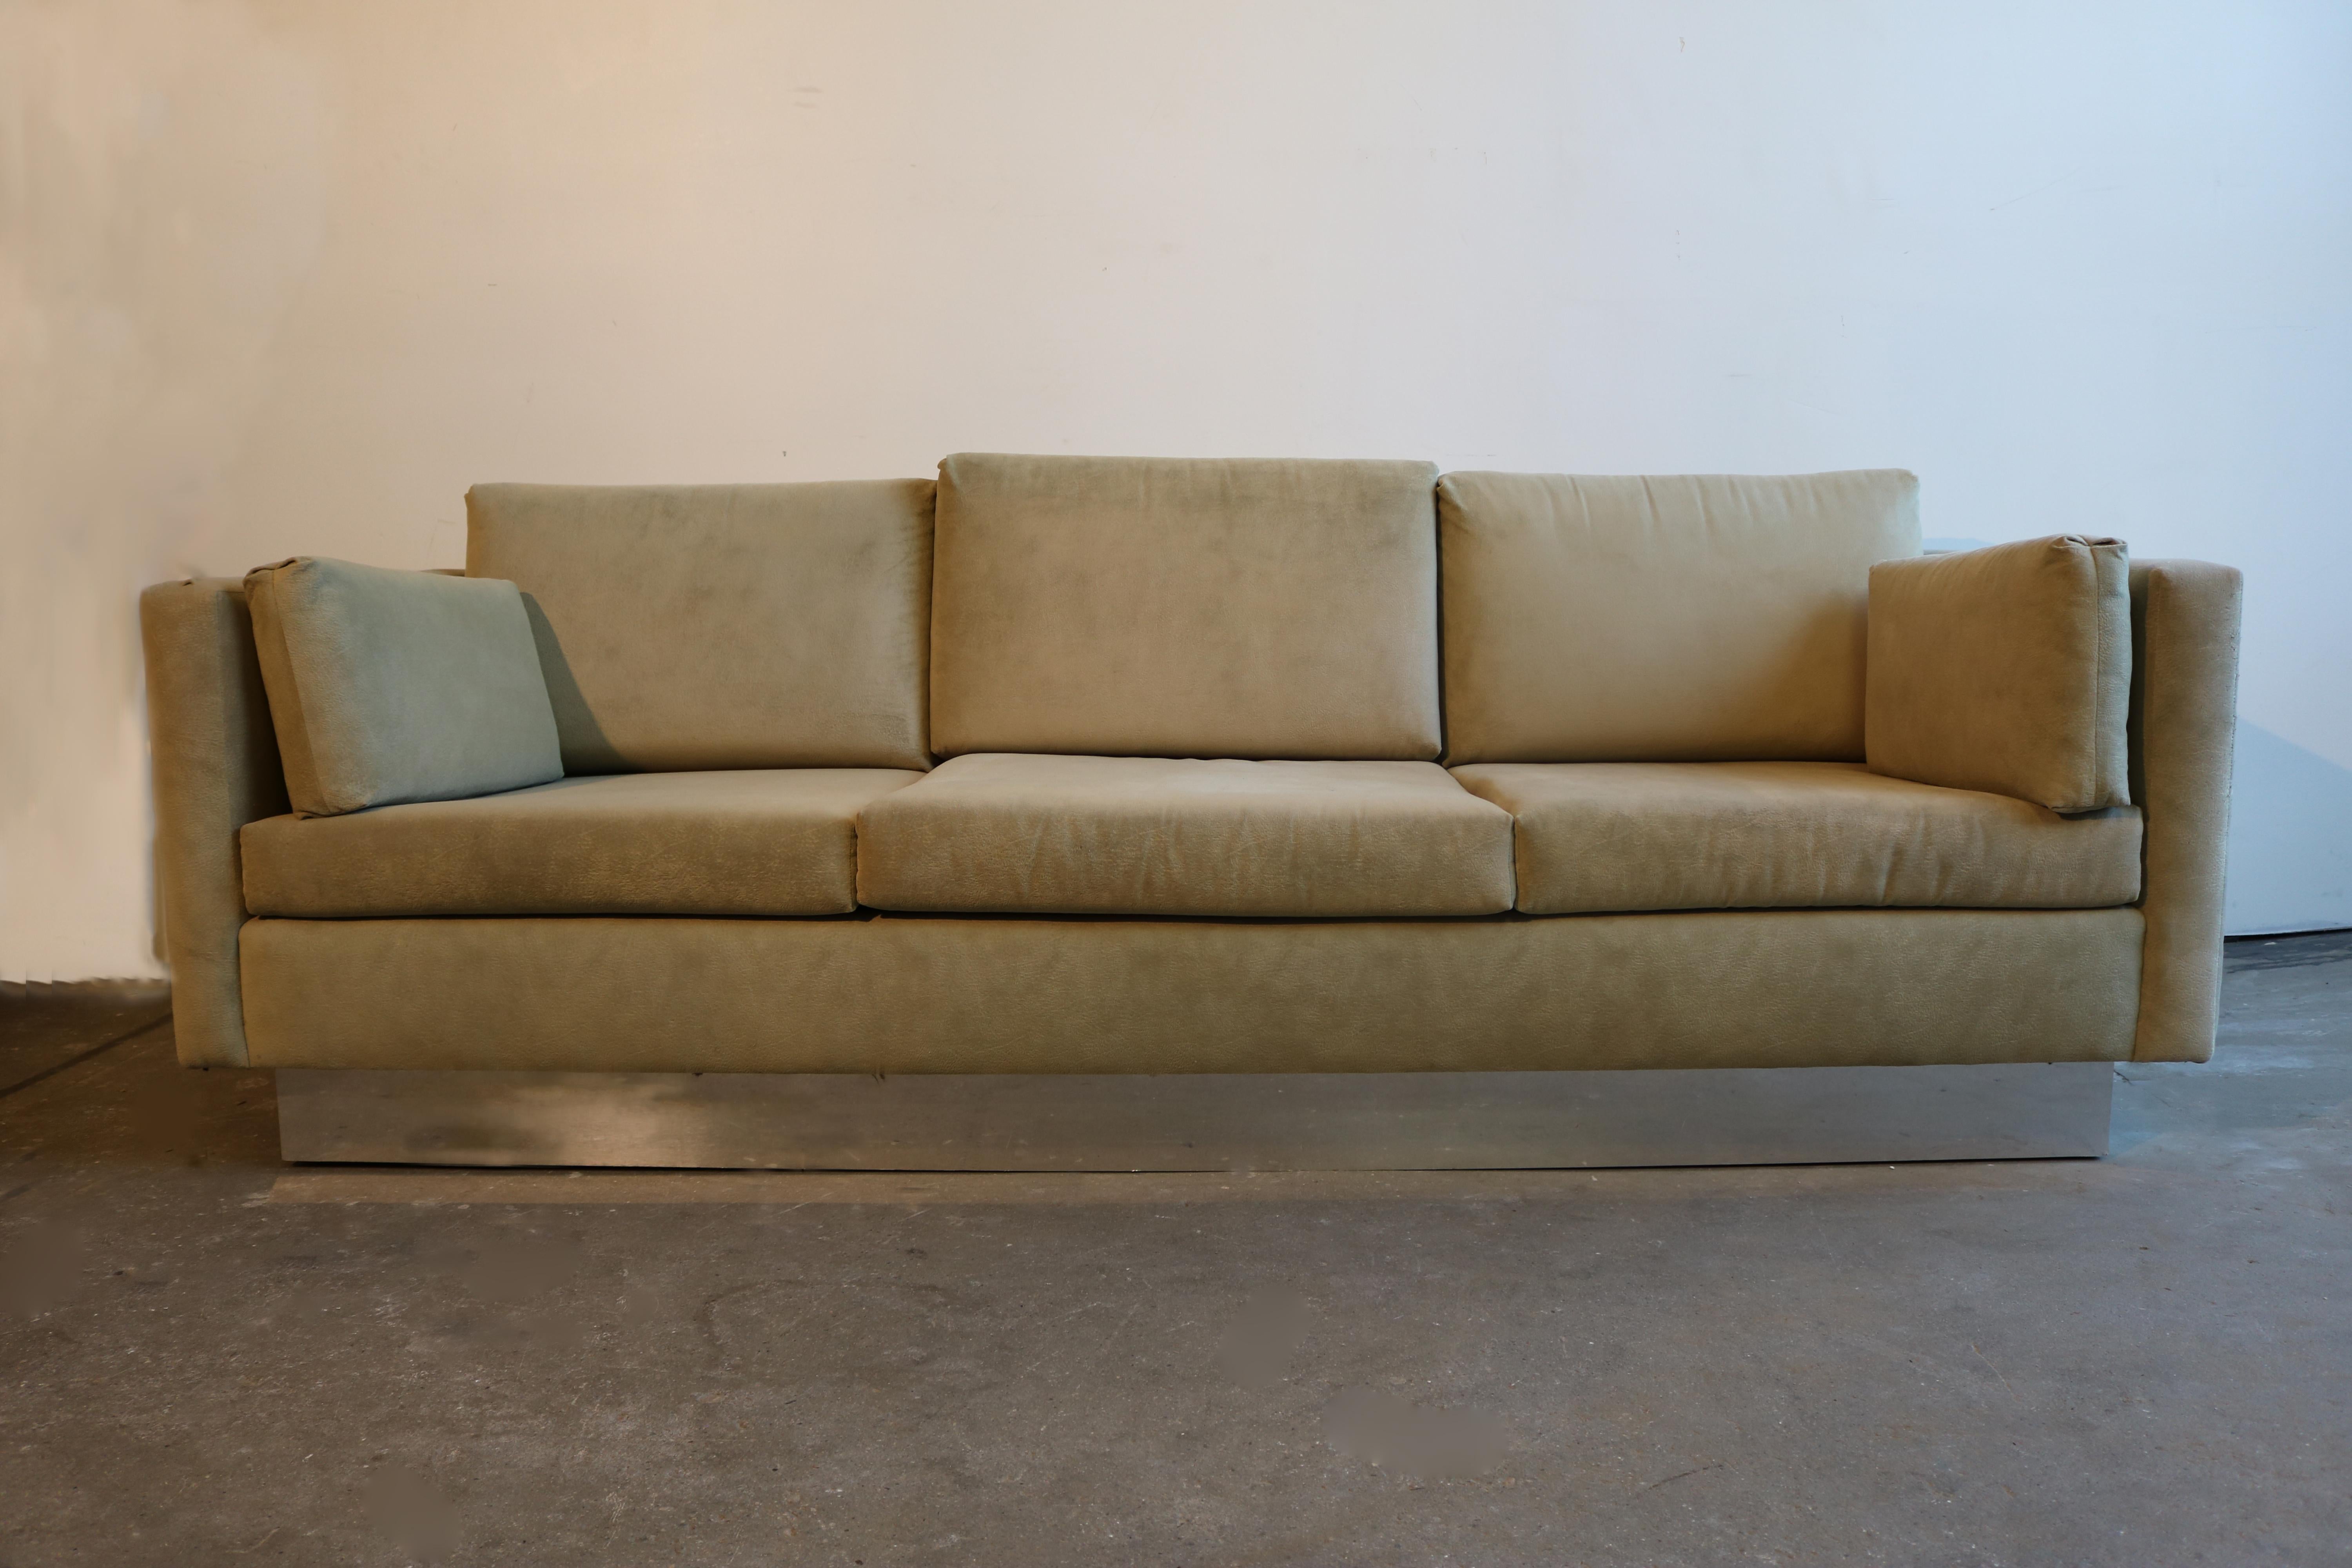 This textured suede light grey three-seat sofa rests on a chrome base, with two side cushions. 
The frame's height is 24.5.